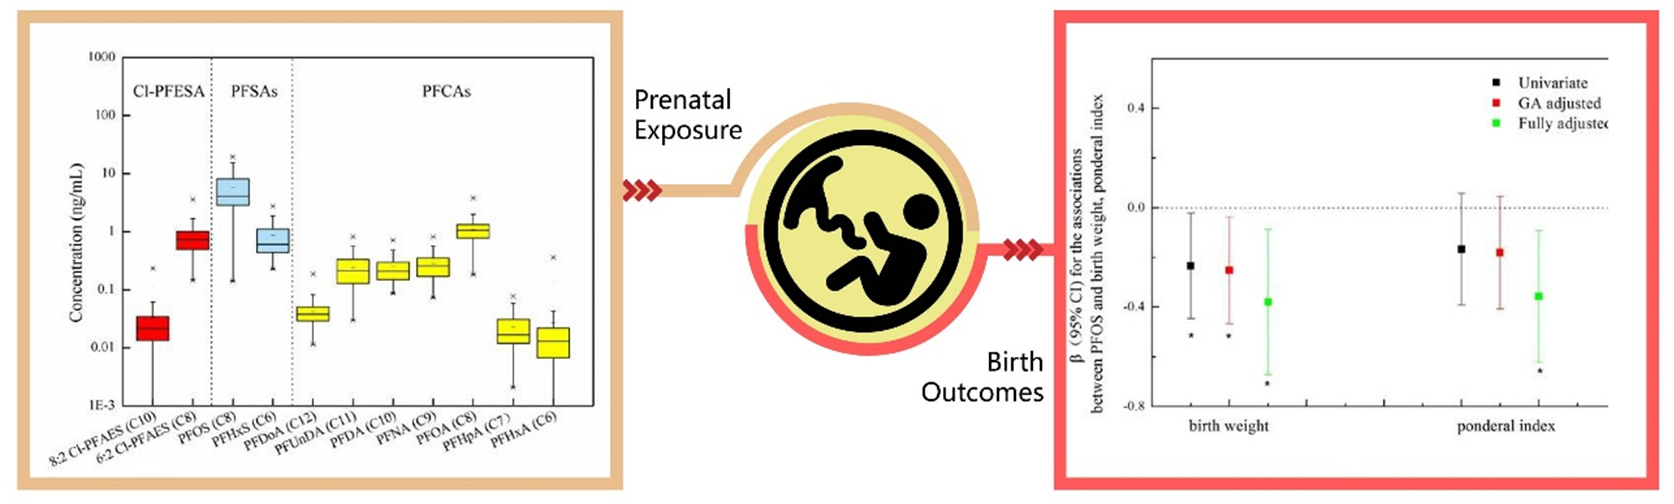 Atlas of Science. Box Chart of PFASs in cord serum and their associations with birth outcomes